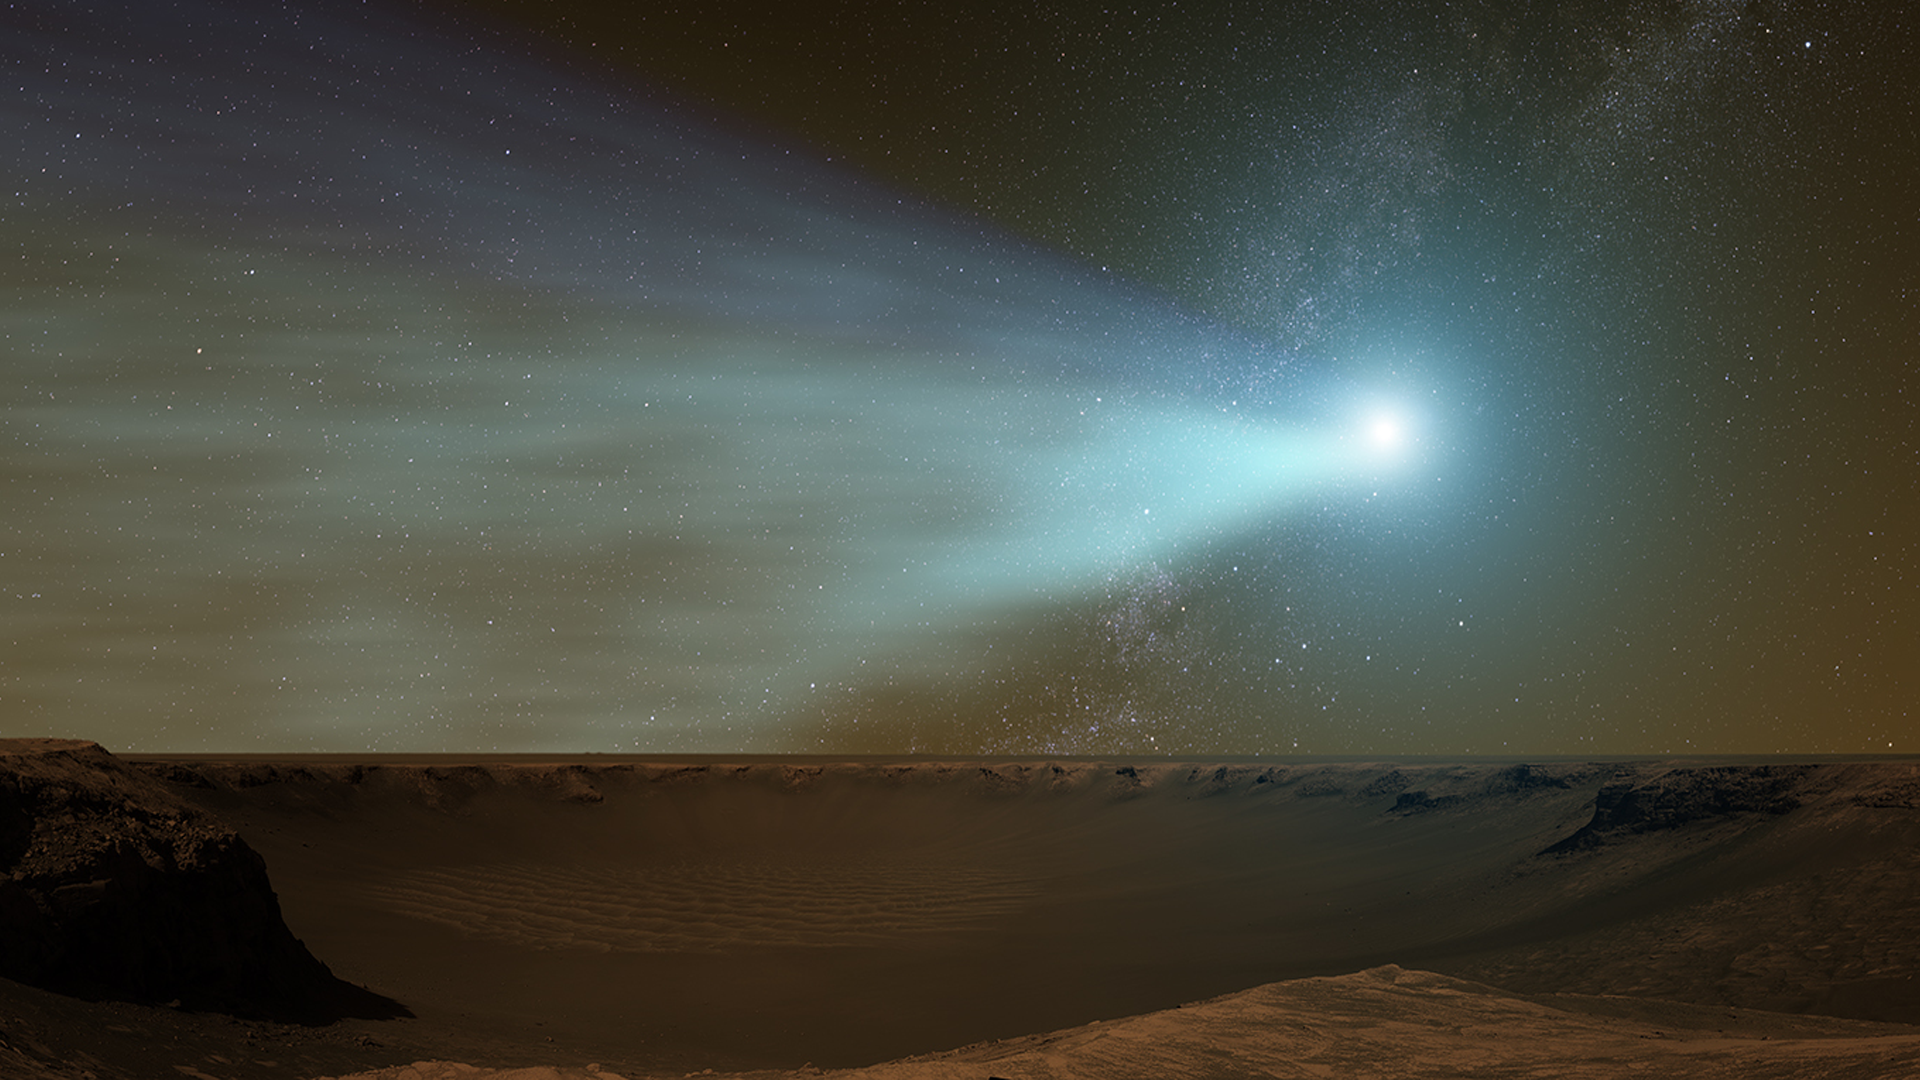 Preview Image for Observing Comet Siding Spring at Mars